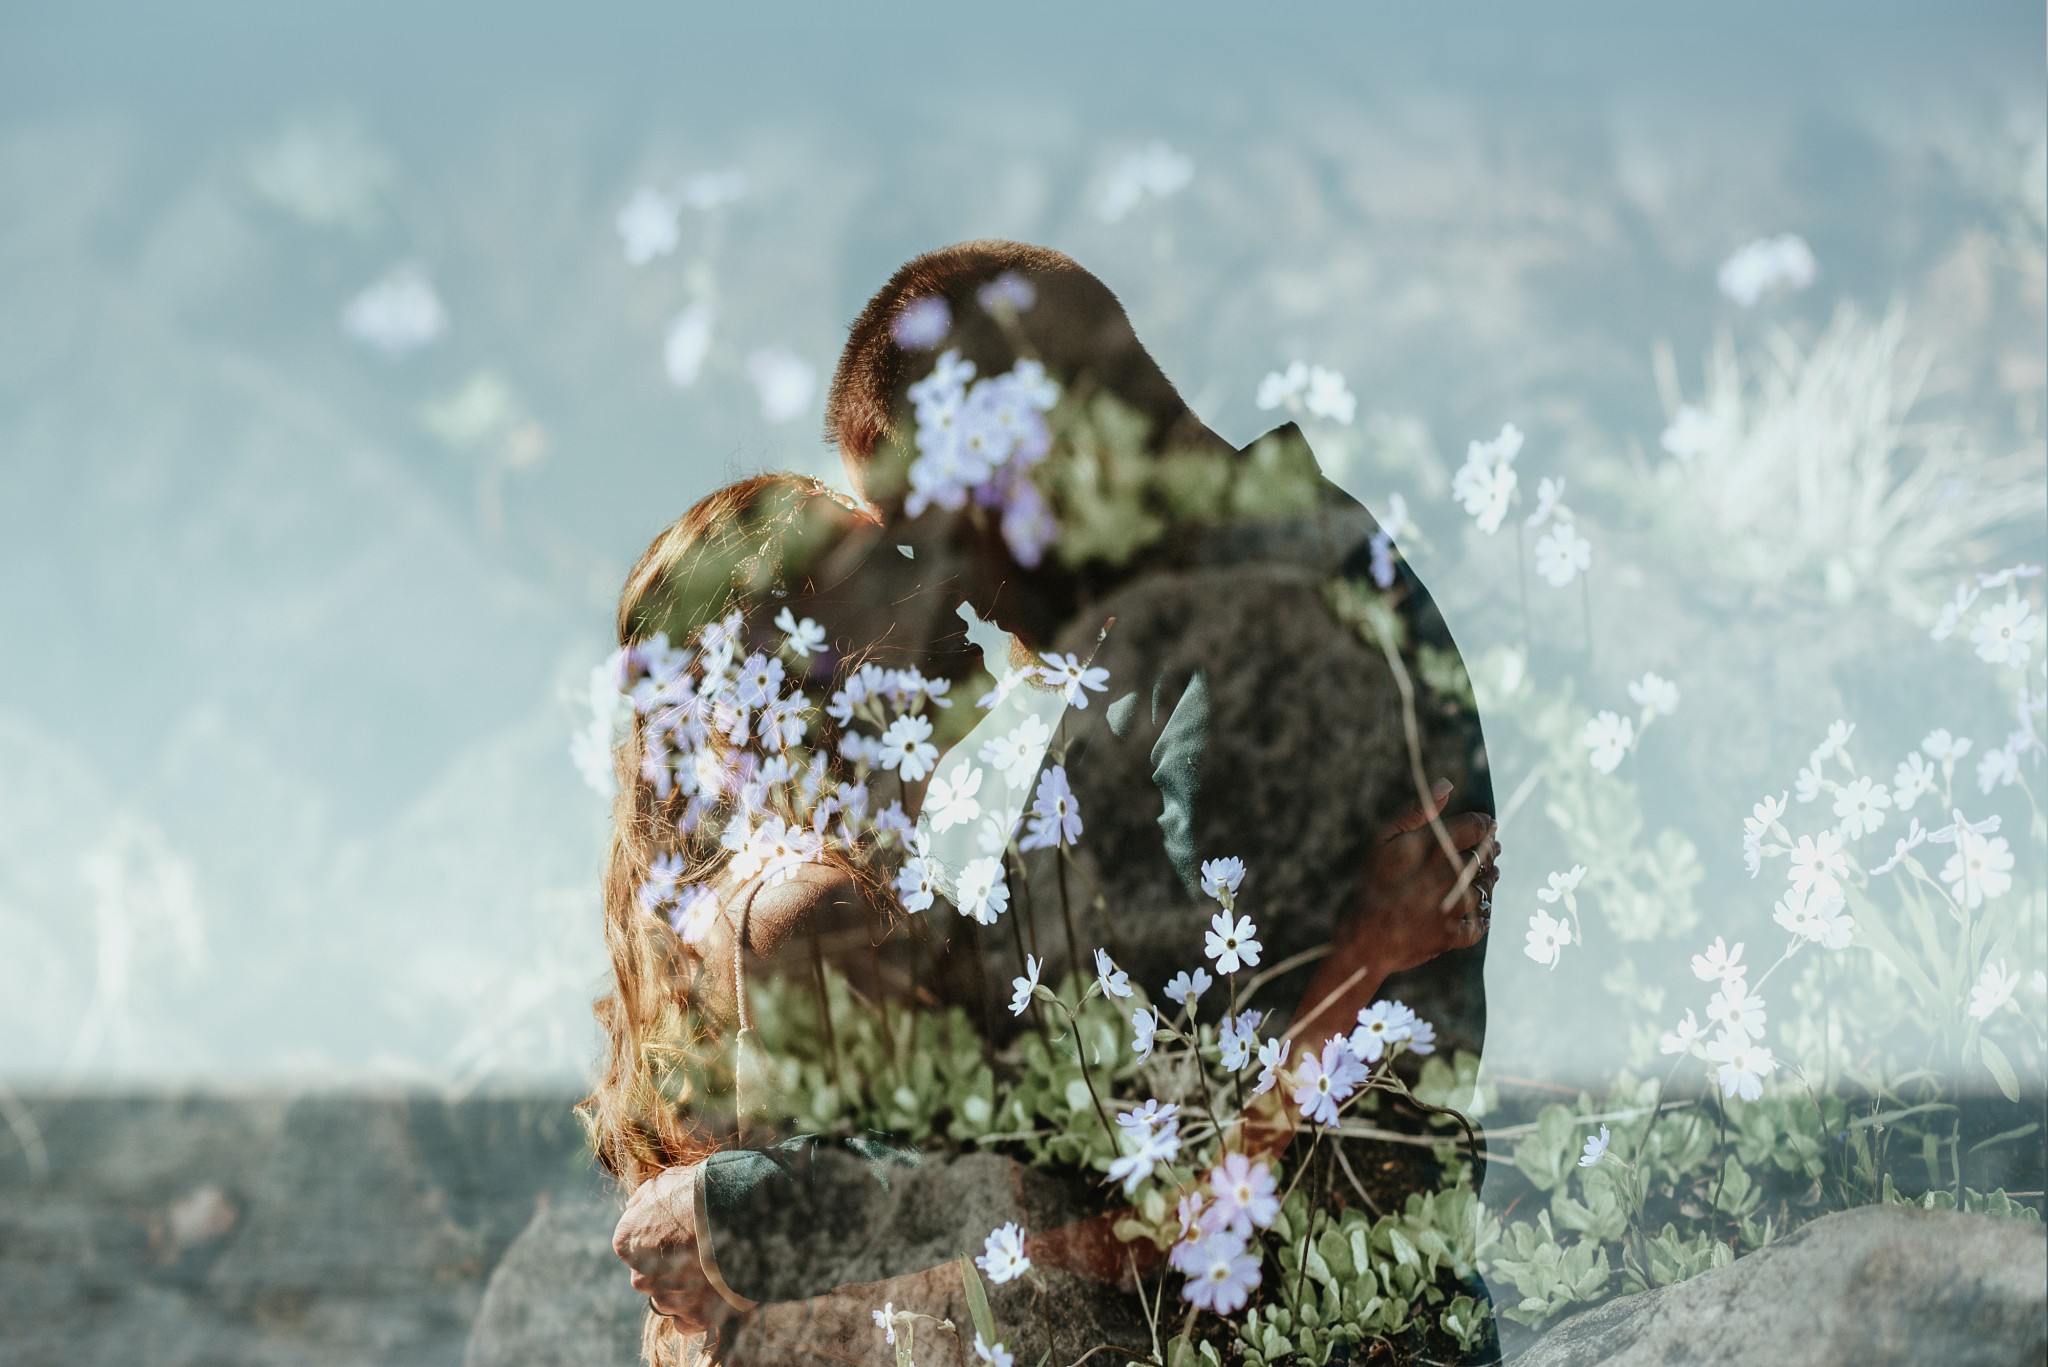 A double-exposure of the couple kissing with small purple flowers overlayed.